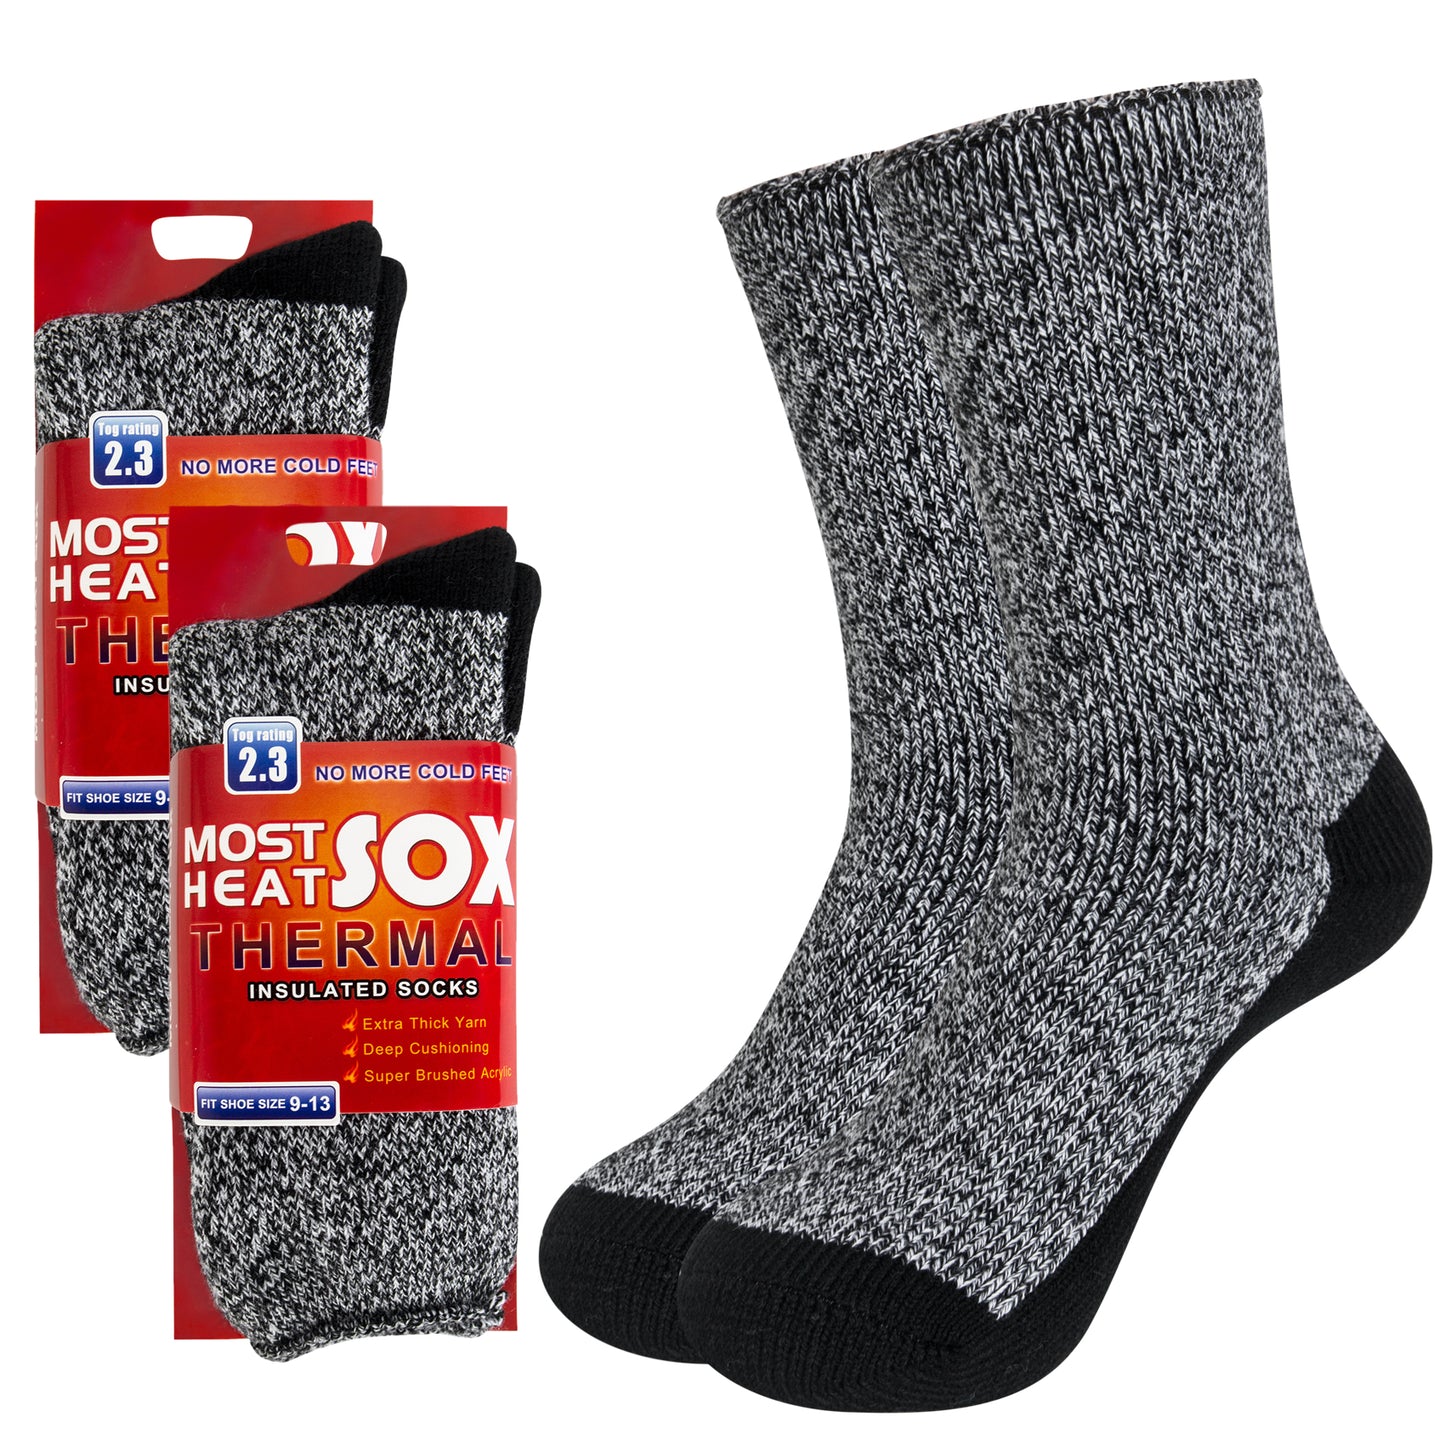 Loritta Thermal Socks for Men Winter Warm Heated Socks for Cold Weather